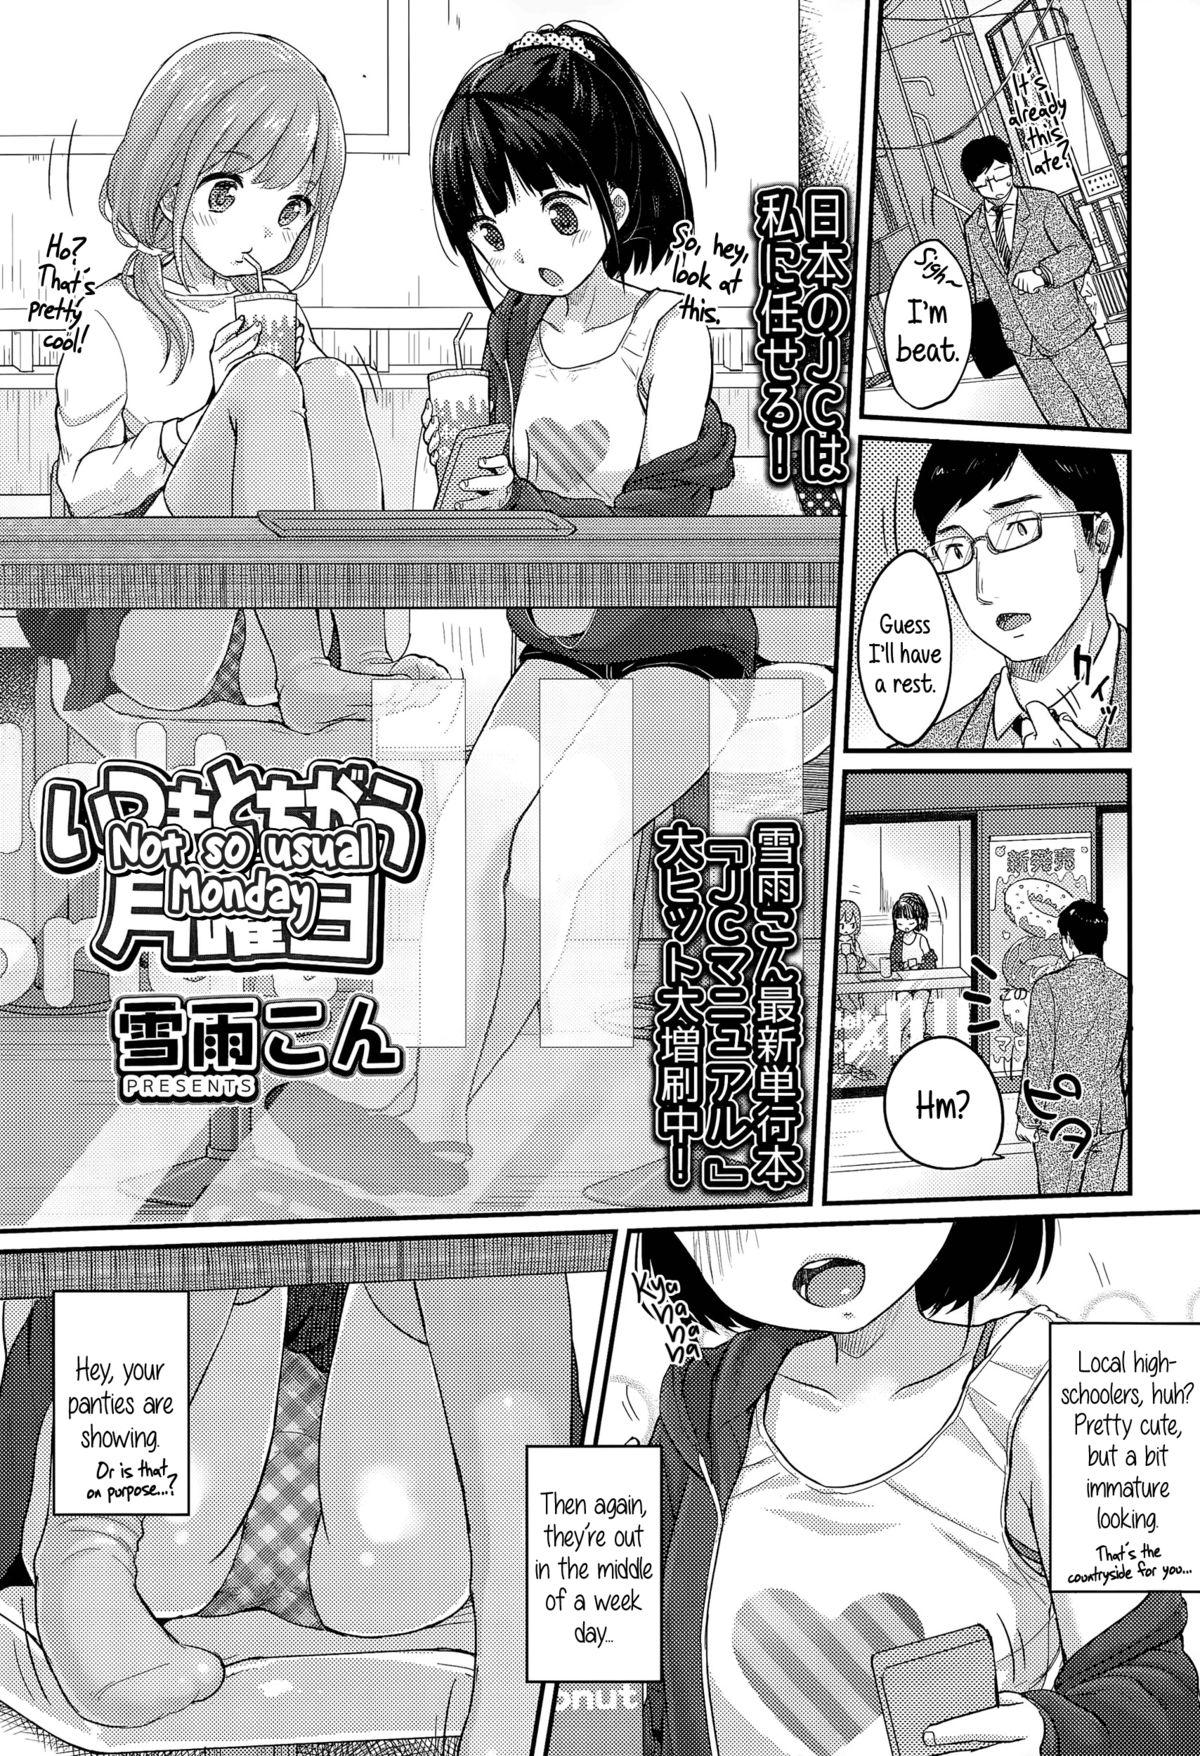 Stranger Itsumo to Chigau Getsuyoubi | Not so usual Monday Baile - Page 1